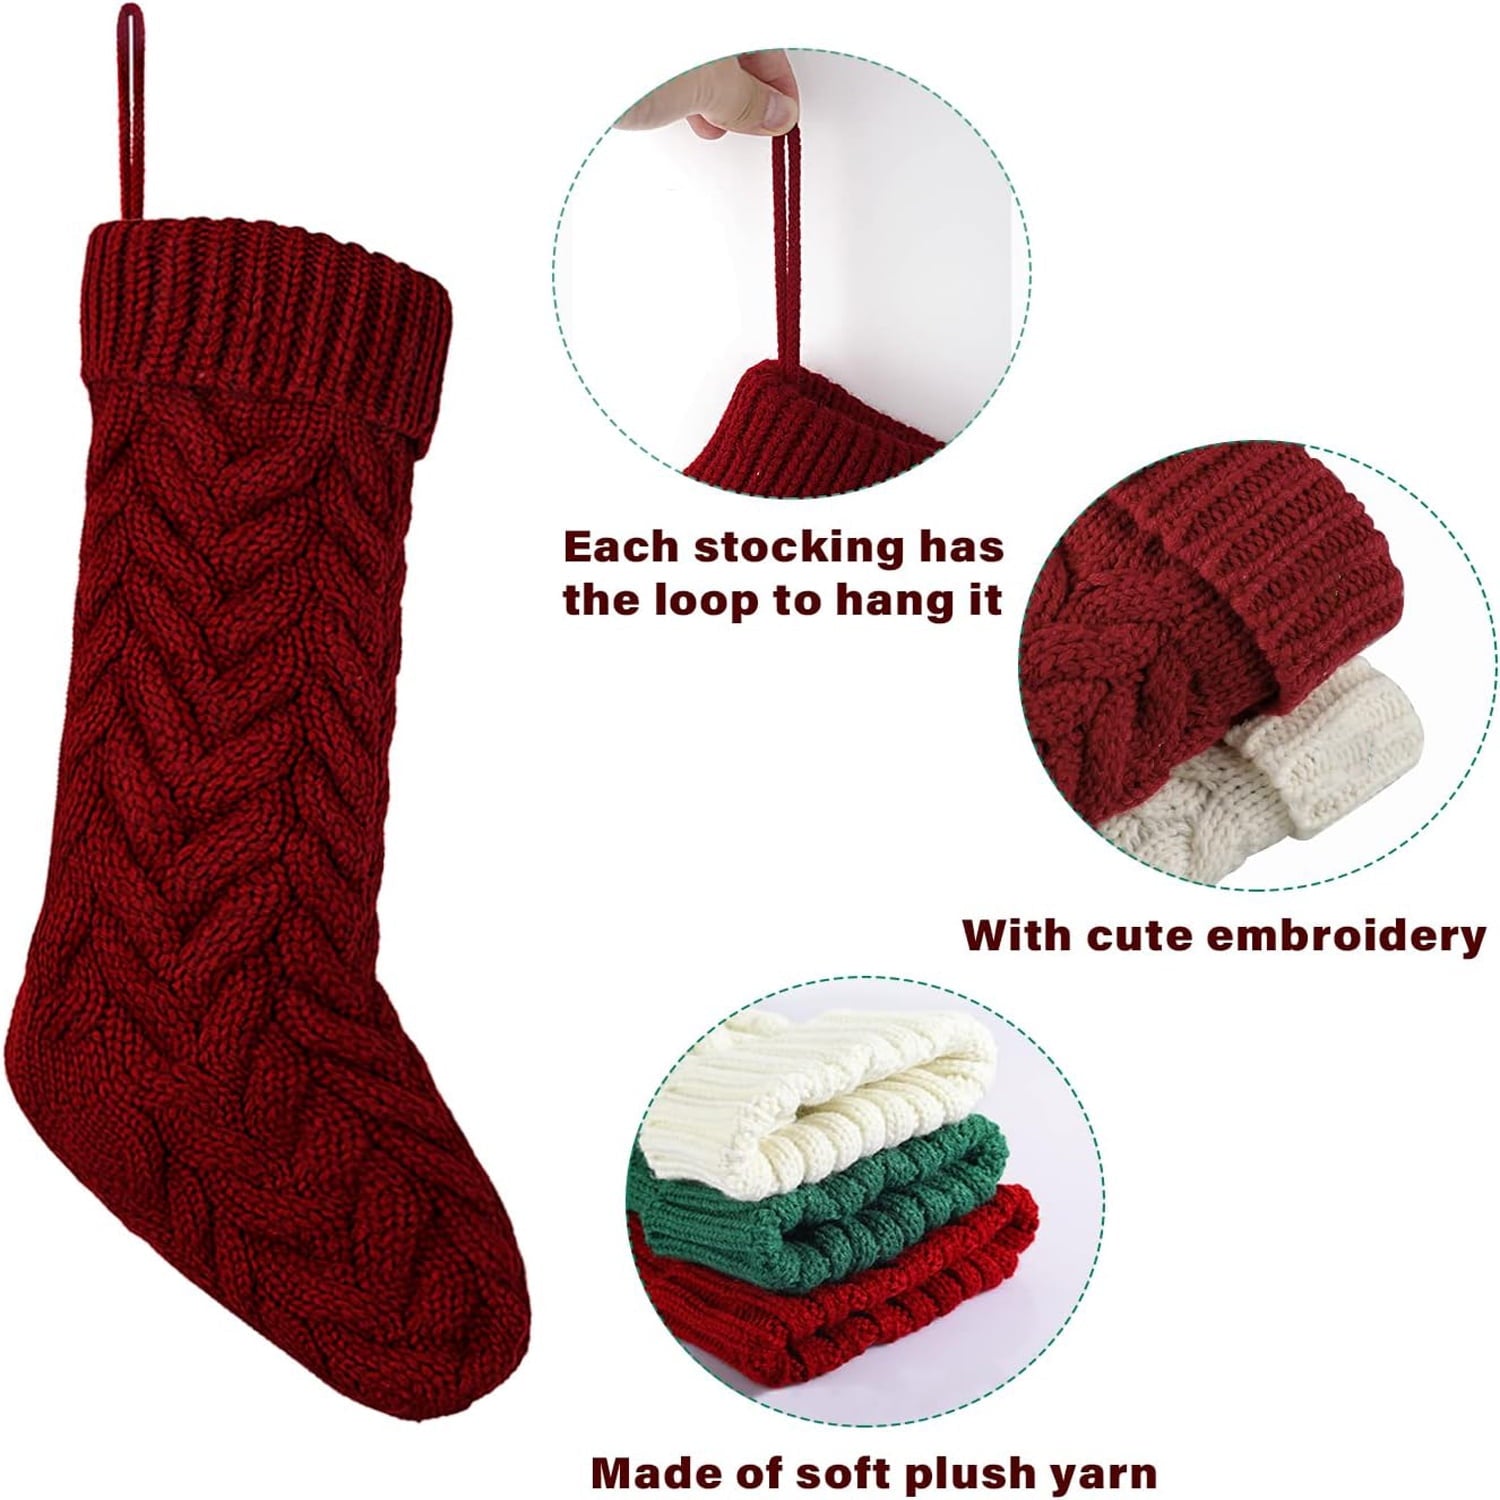 Melliful 18" Large Christmas Stockings, 4 Pack Christmas Hanging Sock Decorations, Plush Knitted Stockings for Family Holiday Christmas Tree Fireplace Decorations